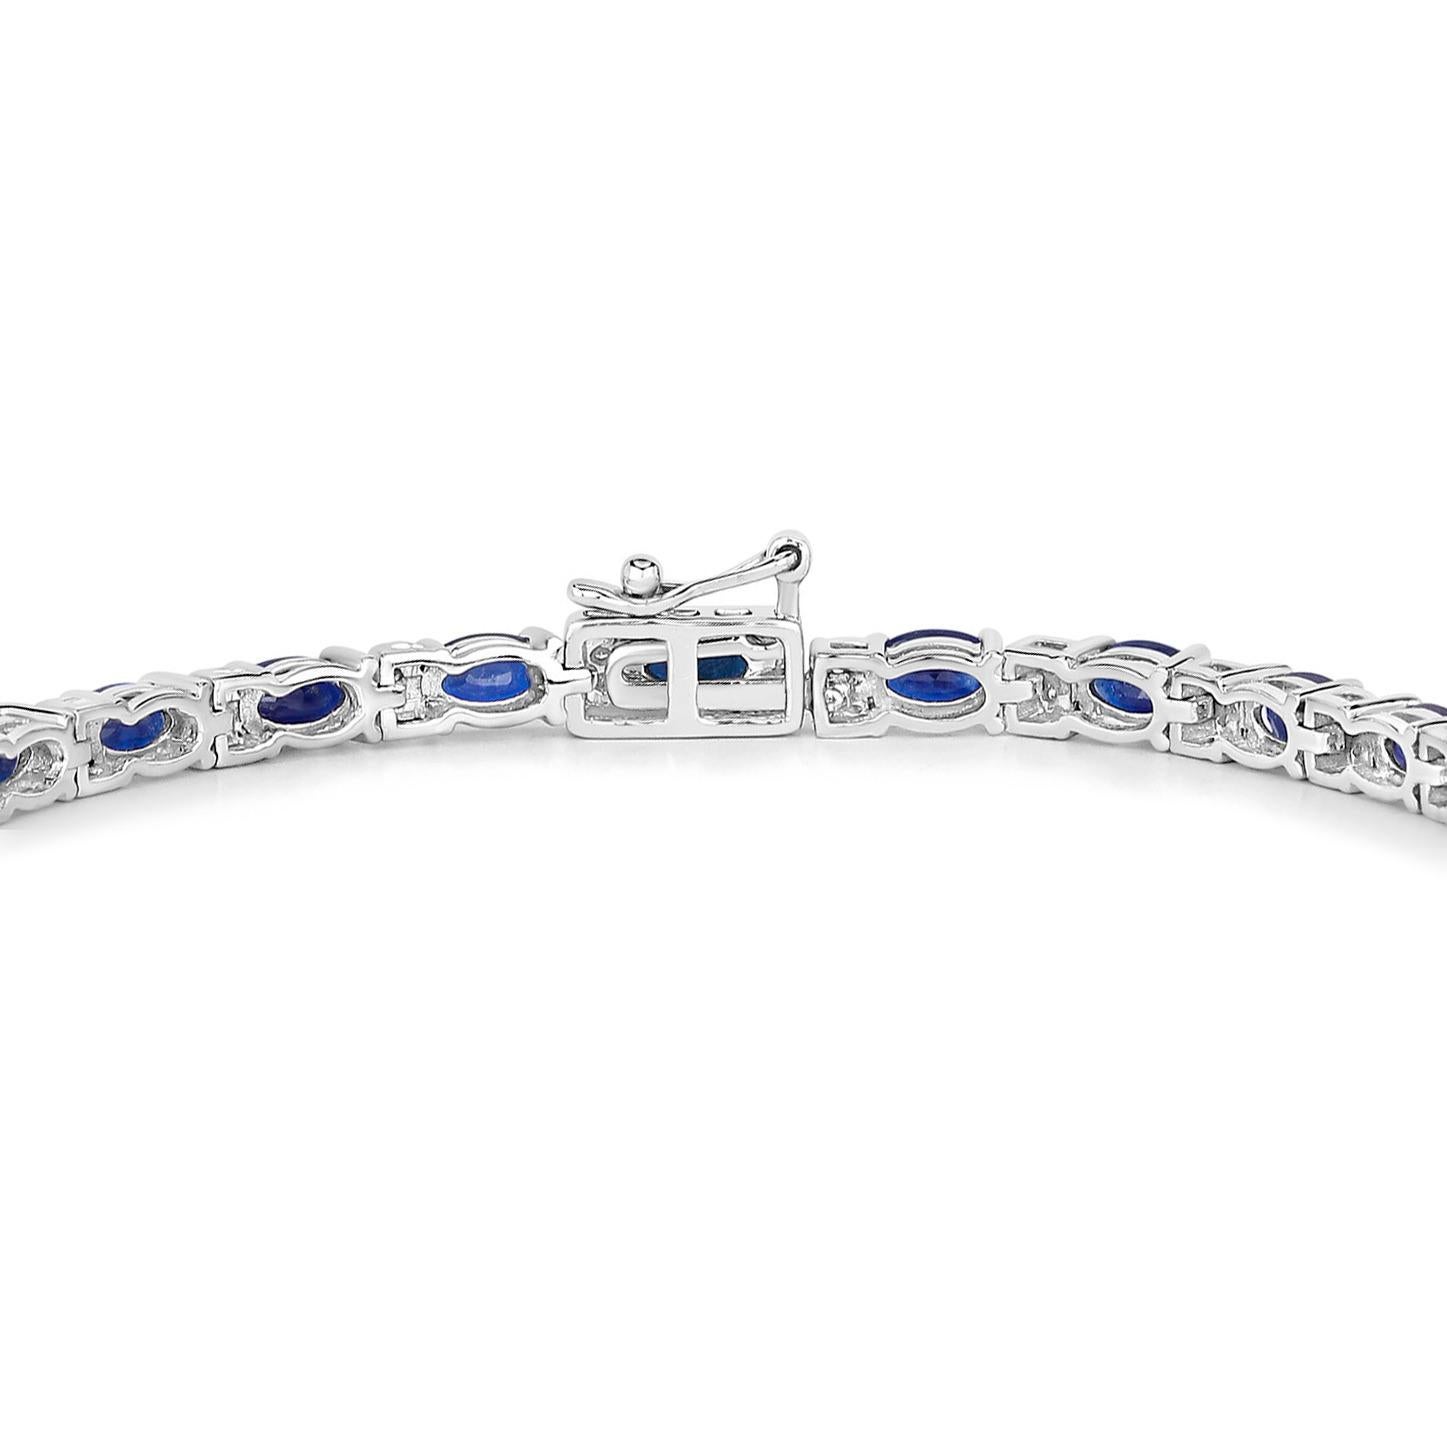 Blue Oval Cut Sapphires Bracelet Diamond Links 5.75 Carats 14K White Gold In Excellent Condition For Sale In Laguna Niguel, CA